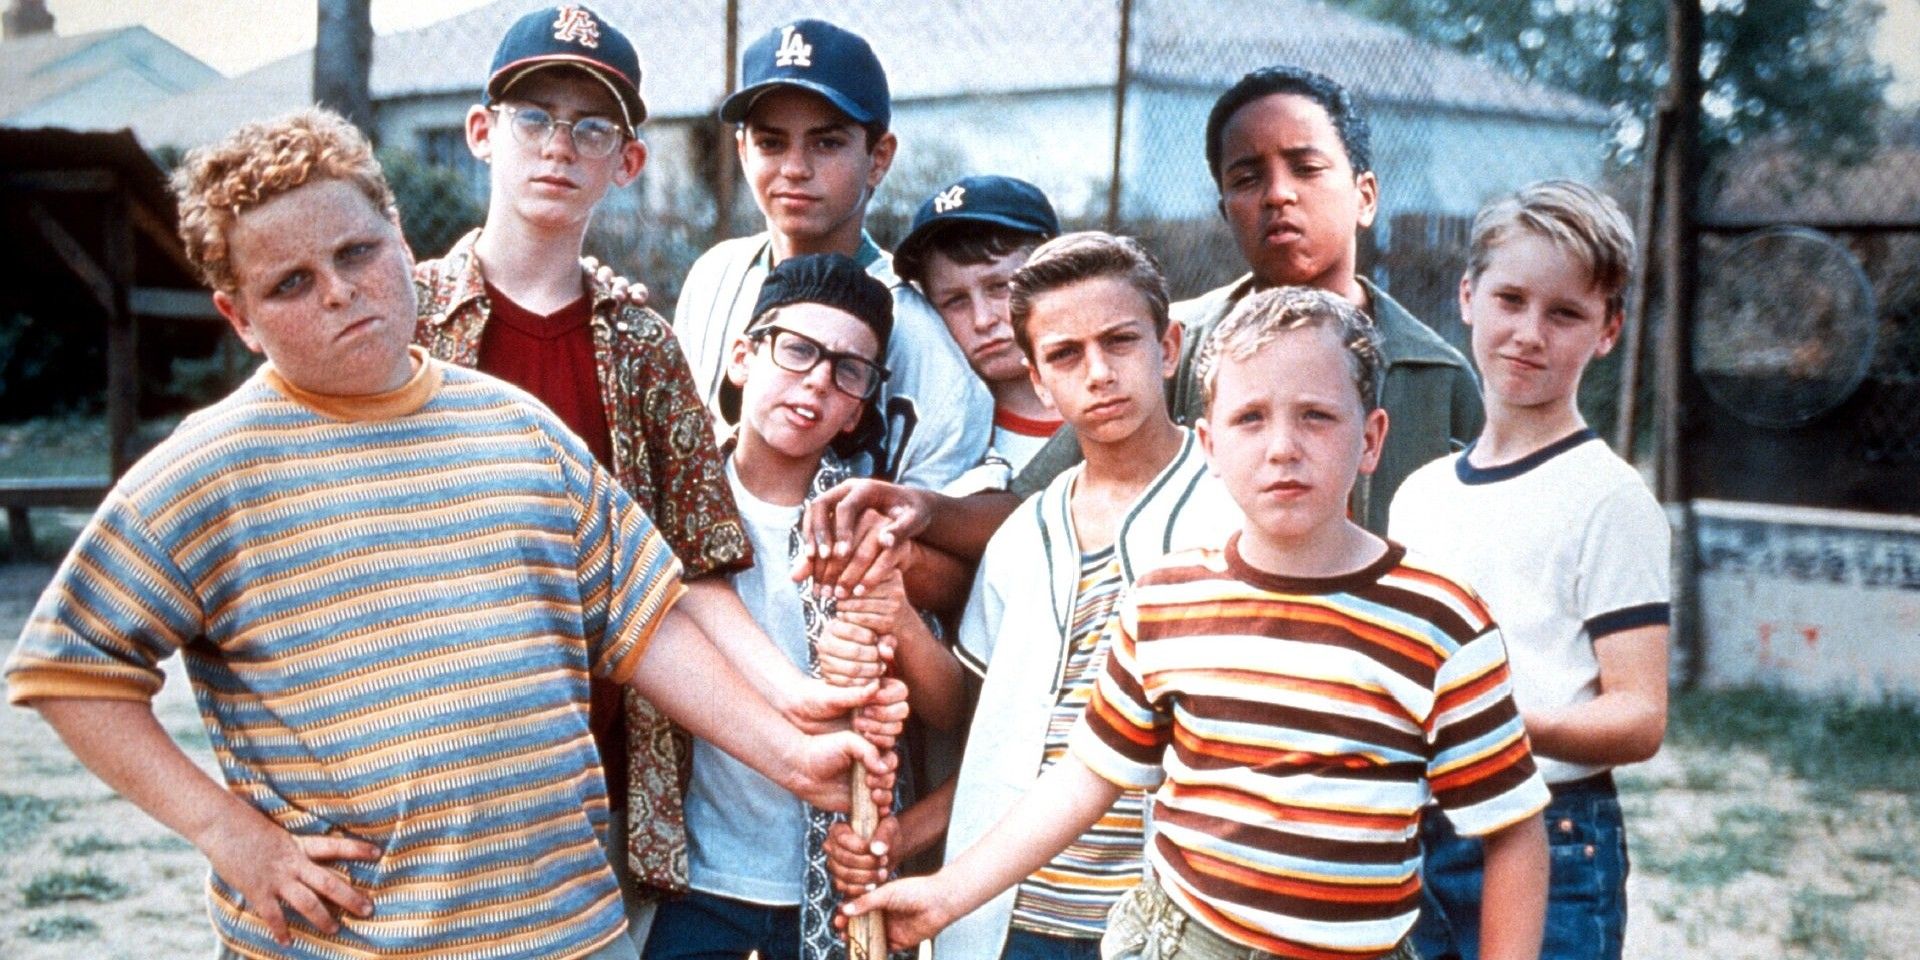 The Sandlot is Getting a Sequel TV Series With Original Cast